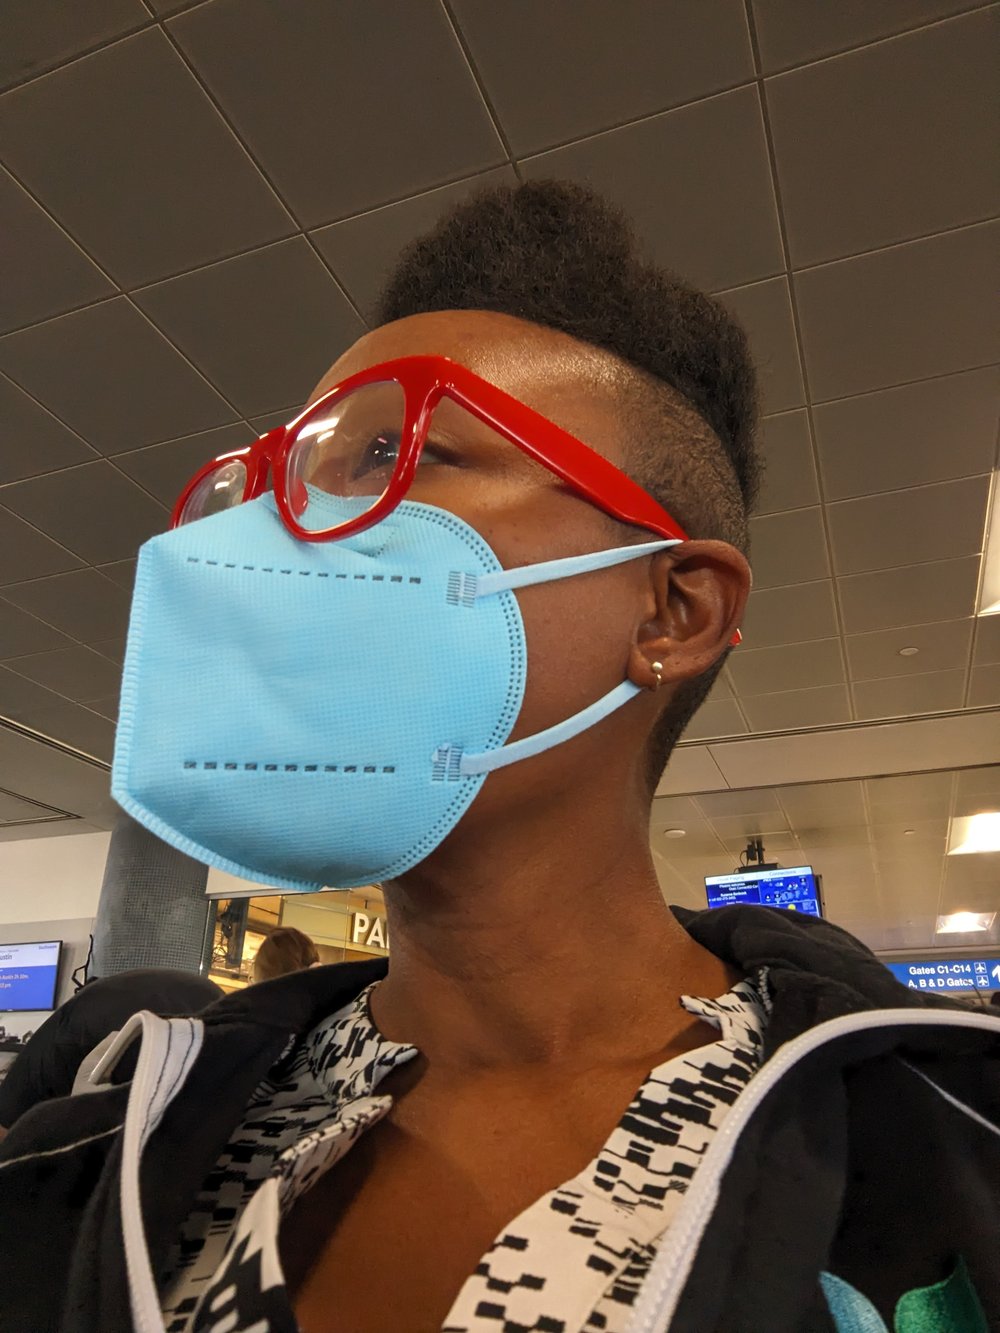 Trying to find other folks wearing masks in the airport (srsly folks, covid is not over)